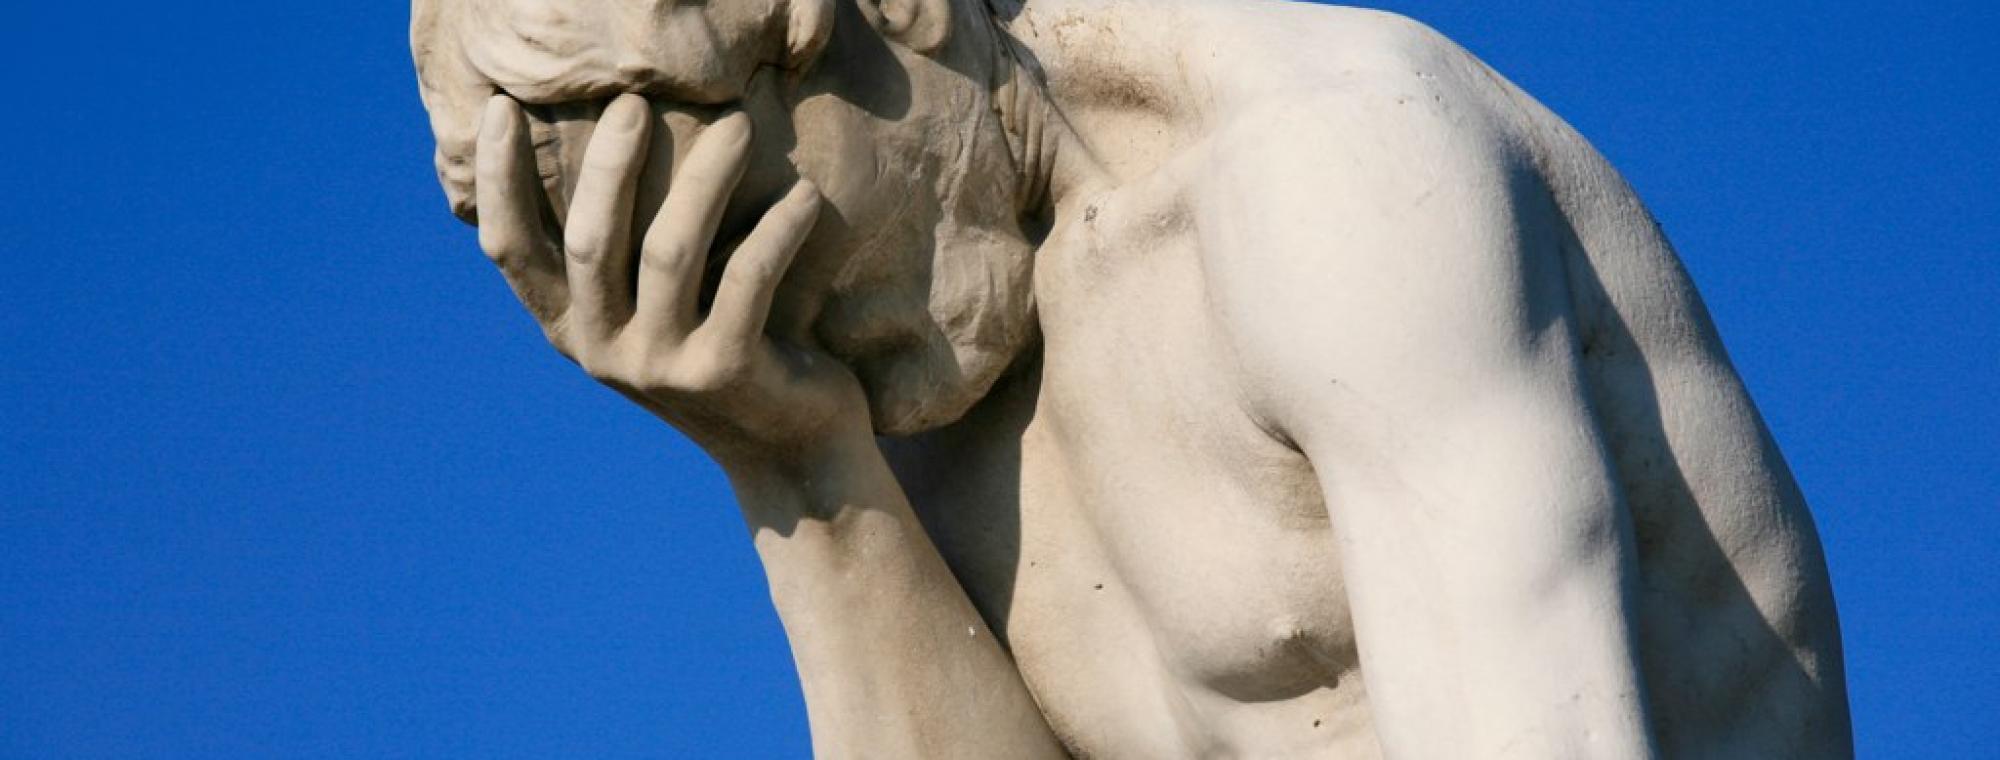 Paris Tuileries Garden Facepalm statue. This image was originally posted to Flickr by Alex E. Proimos